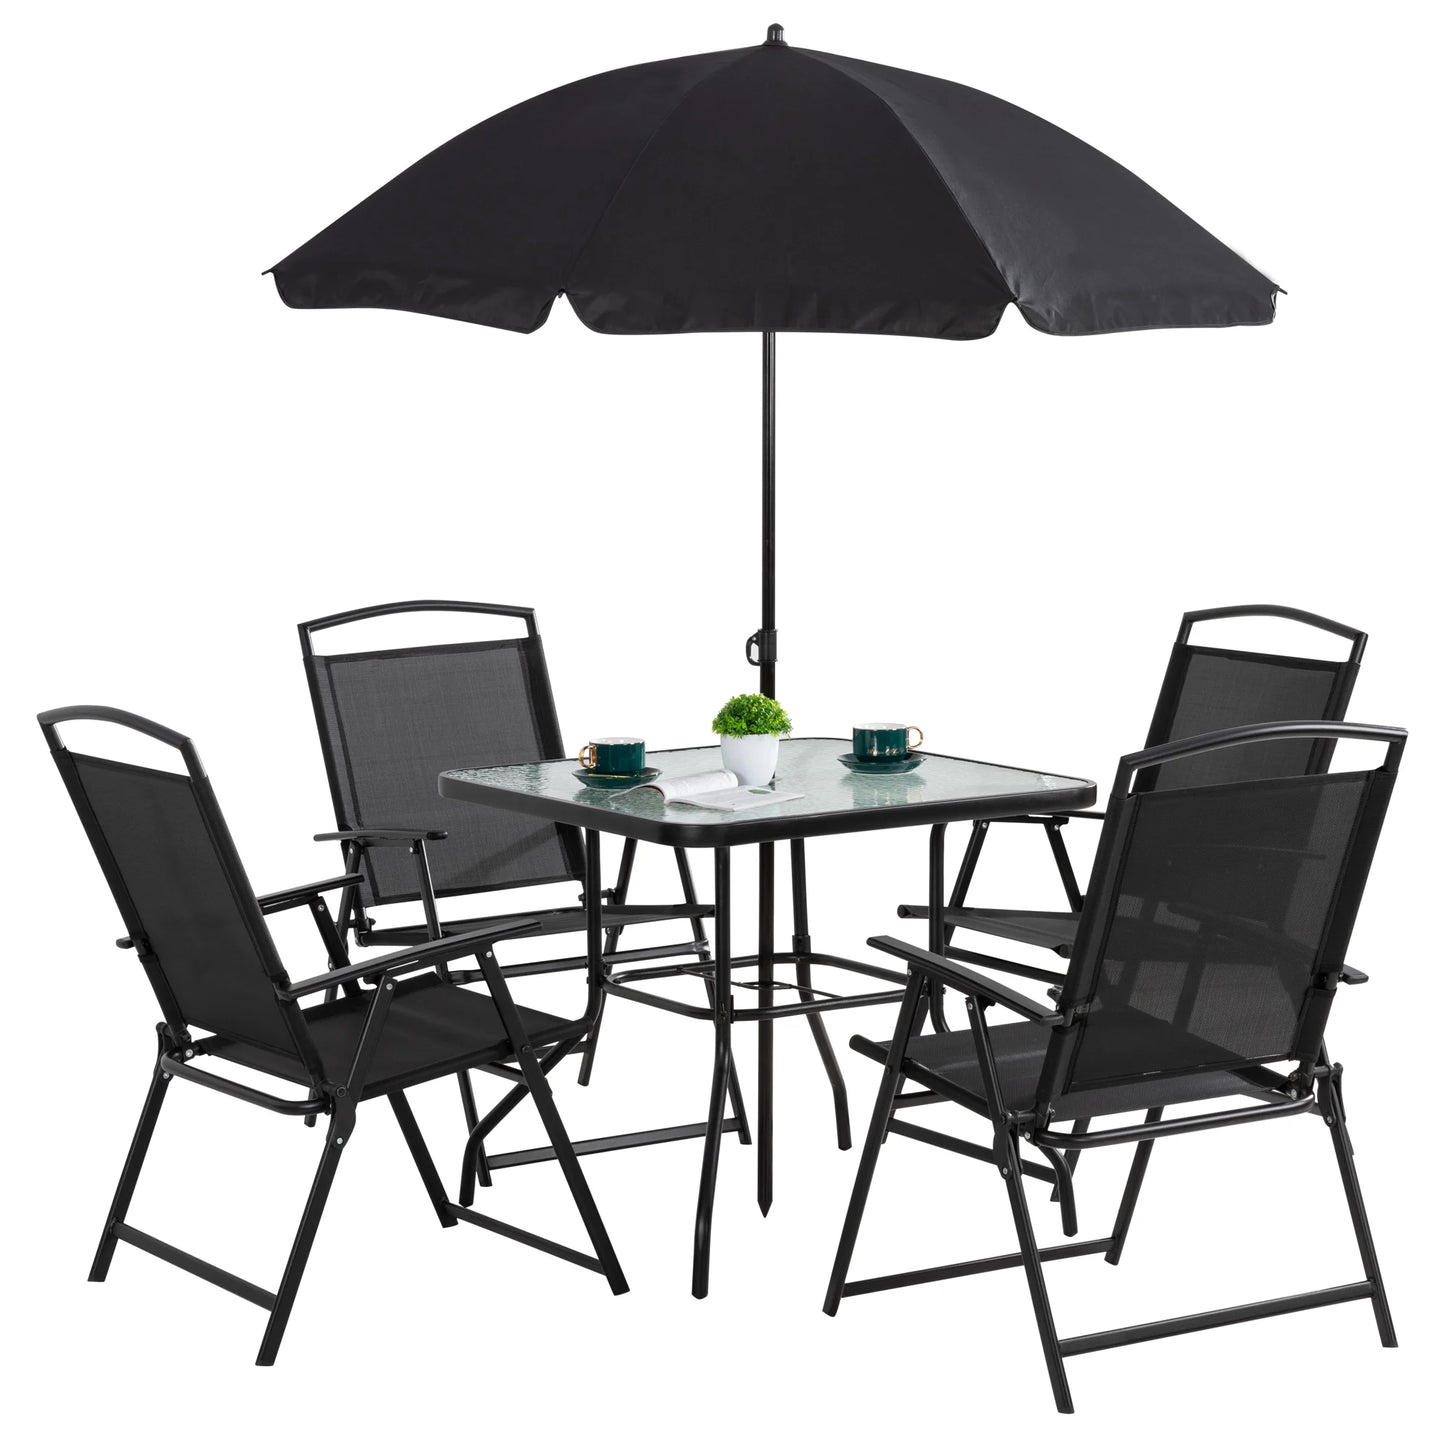 6 Piece Patio Dining Set with Umbrella, Outdoor Garden Set with 4 Folding Chairs and Tempered Glass Top Dining Table Black